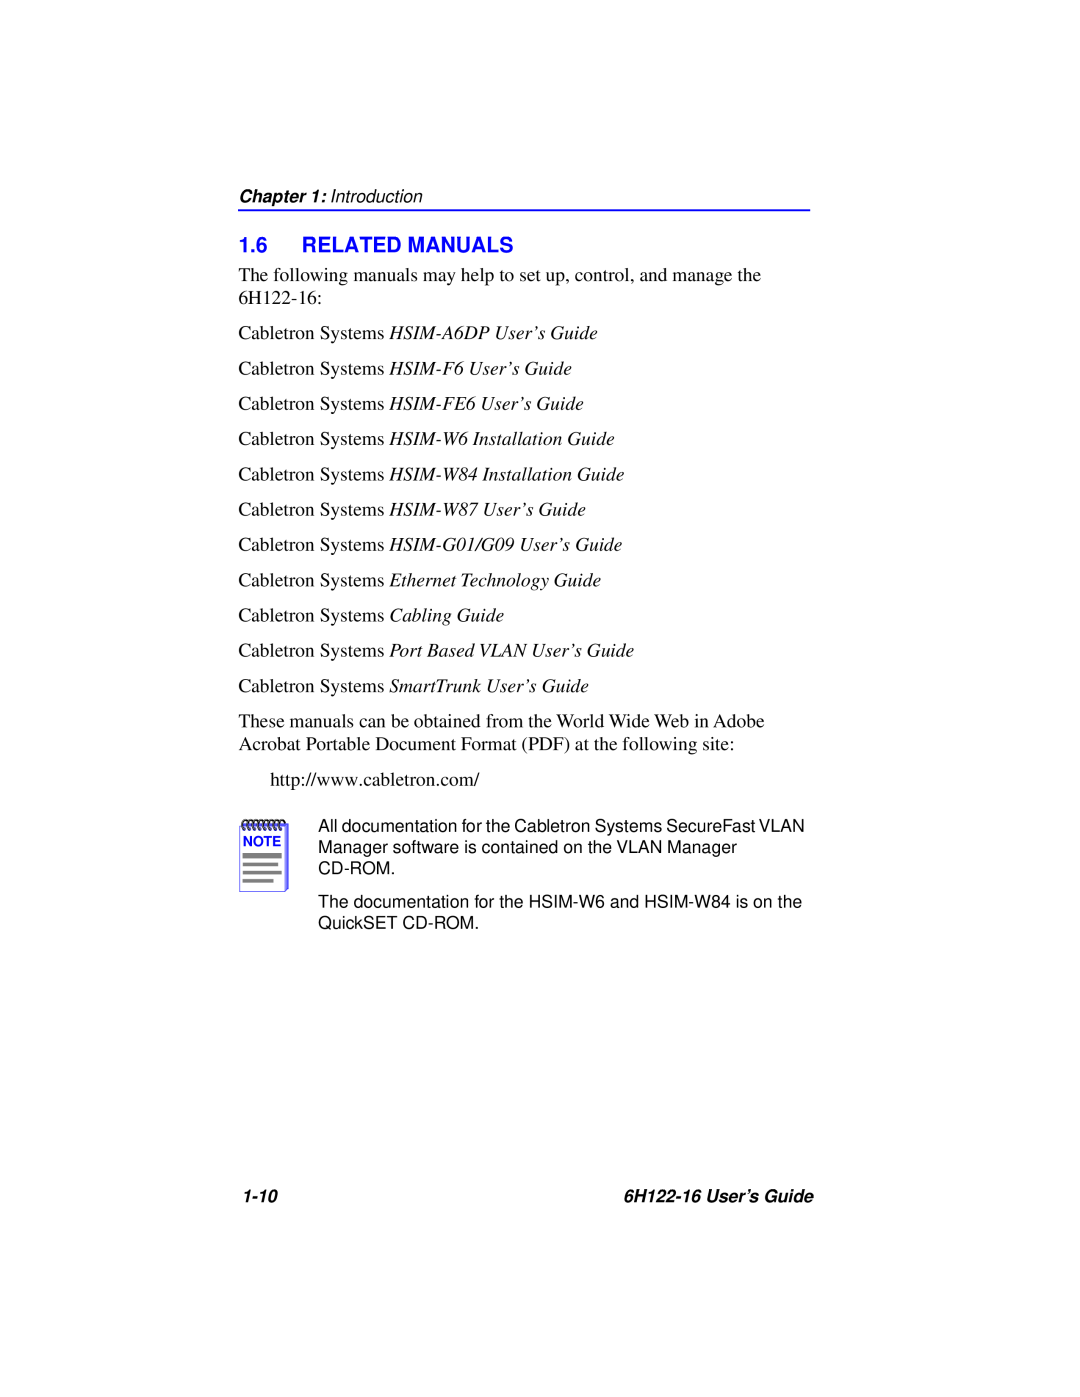 Cabletron Systems 6H122-16 Related Manuals, The following manuals may help to set up, control, and manage the 